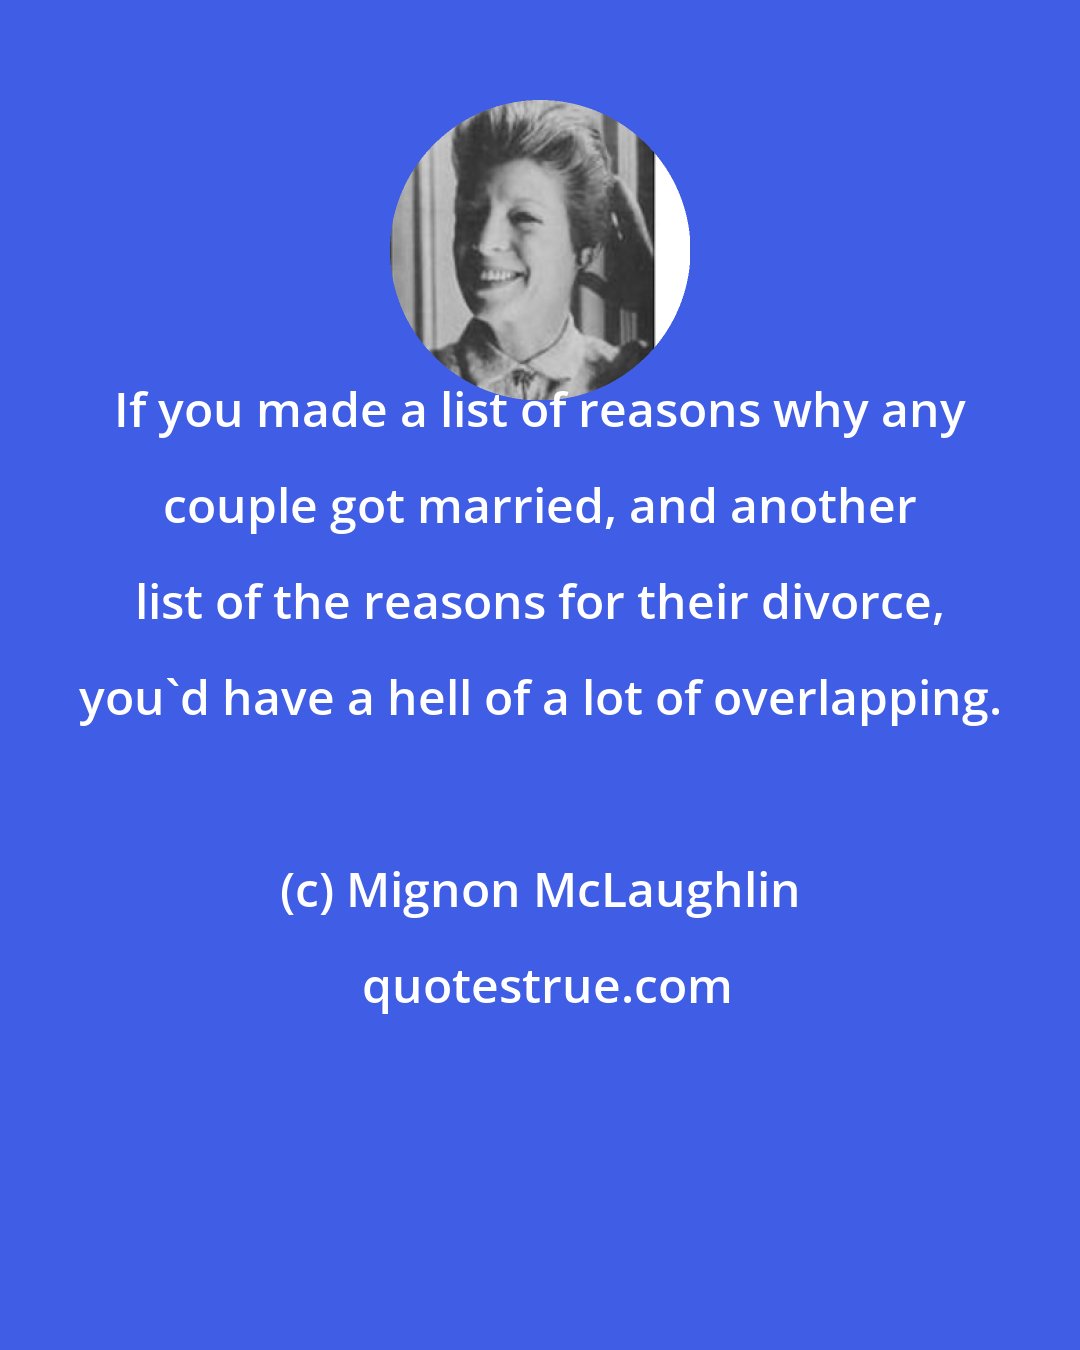 Mignon McLaughlin: If you made a list of reasons why any couple got married, and another list of the reasons for their divorce, you'd have a hell of a lot of overlapping.